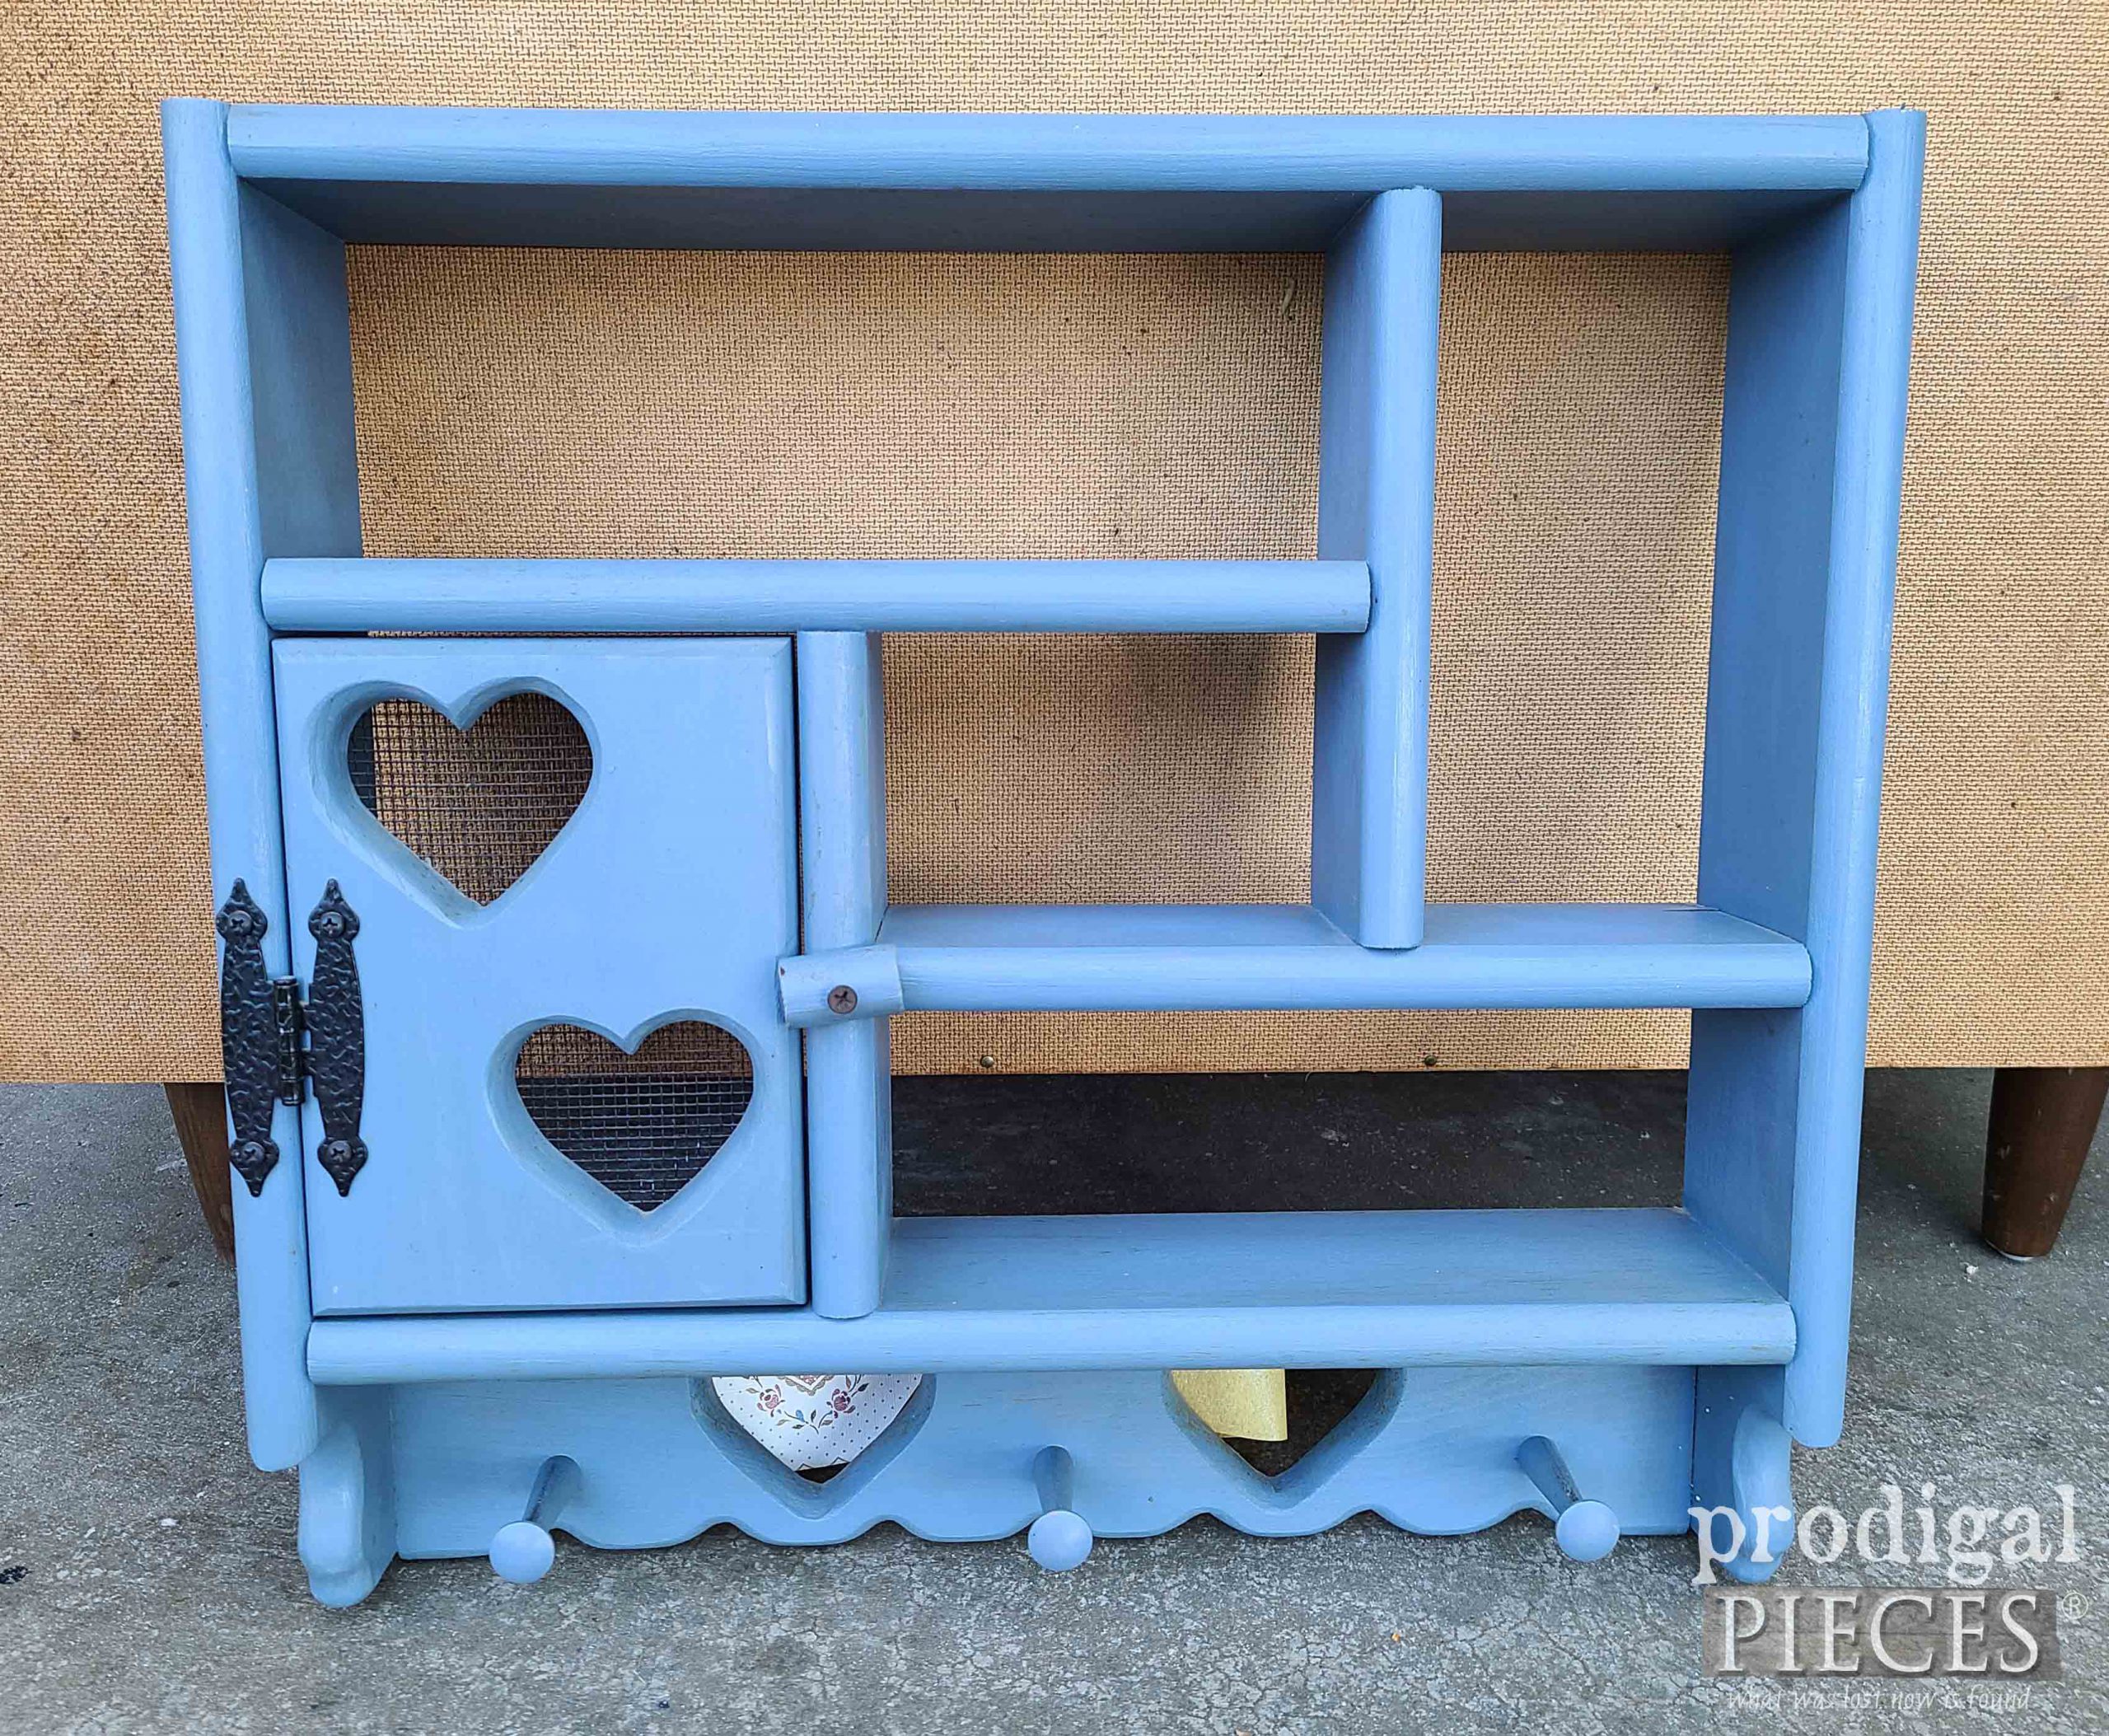 Vintage Country Shelf in Blue with Heart Cut-Outs | prodigalpieces.com #prodigalpieces